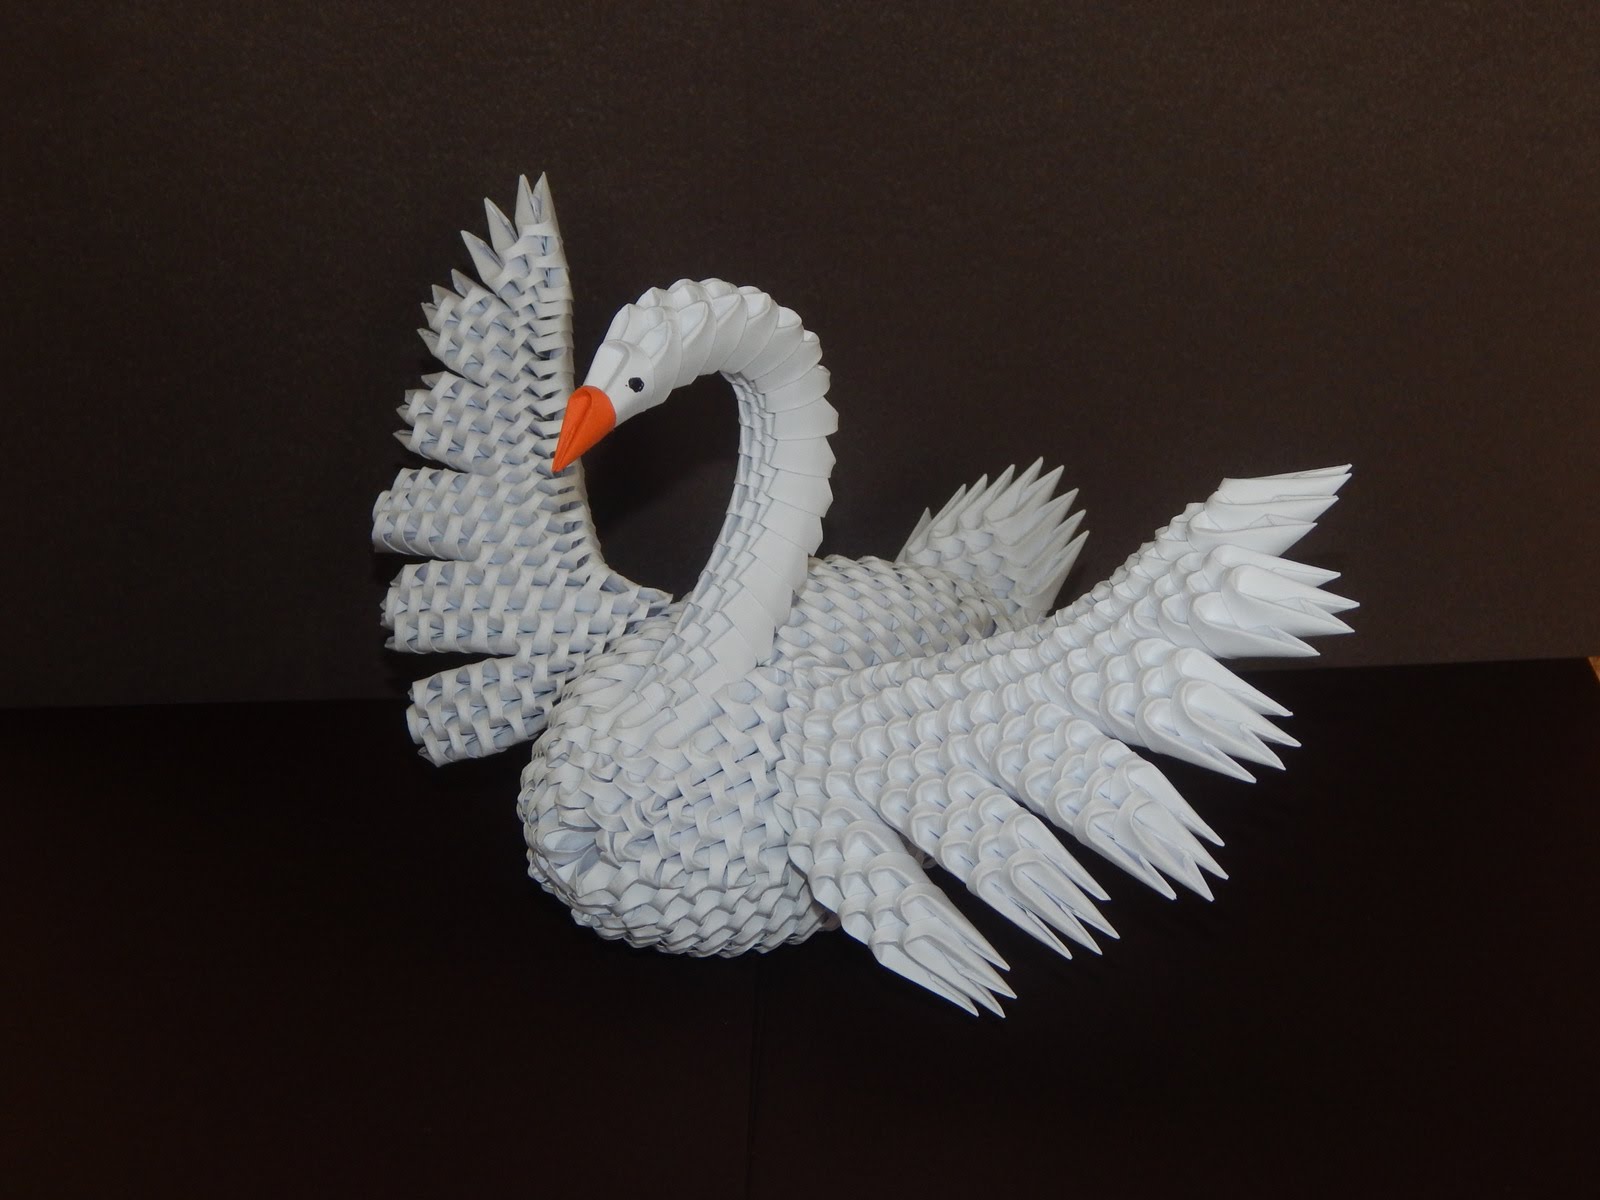 How to make 3d origami swan model7 part2 - YouTube